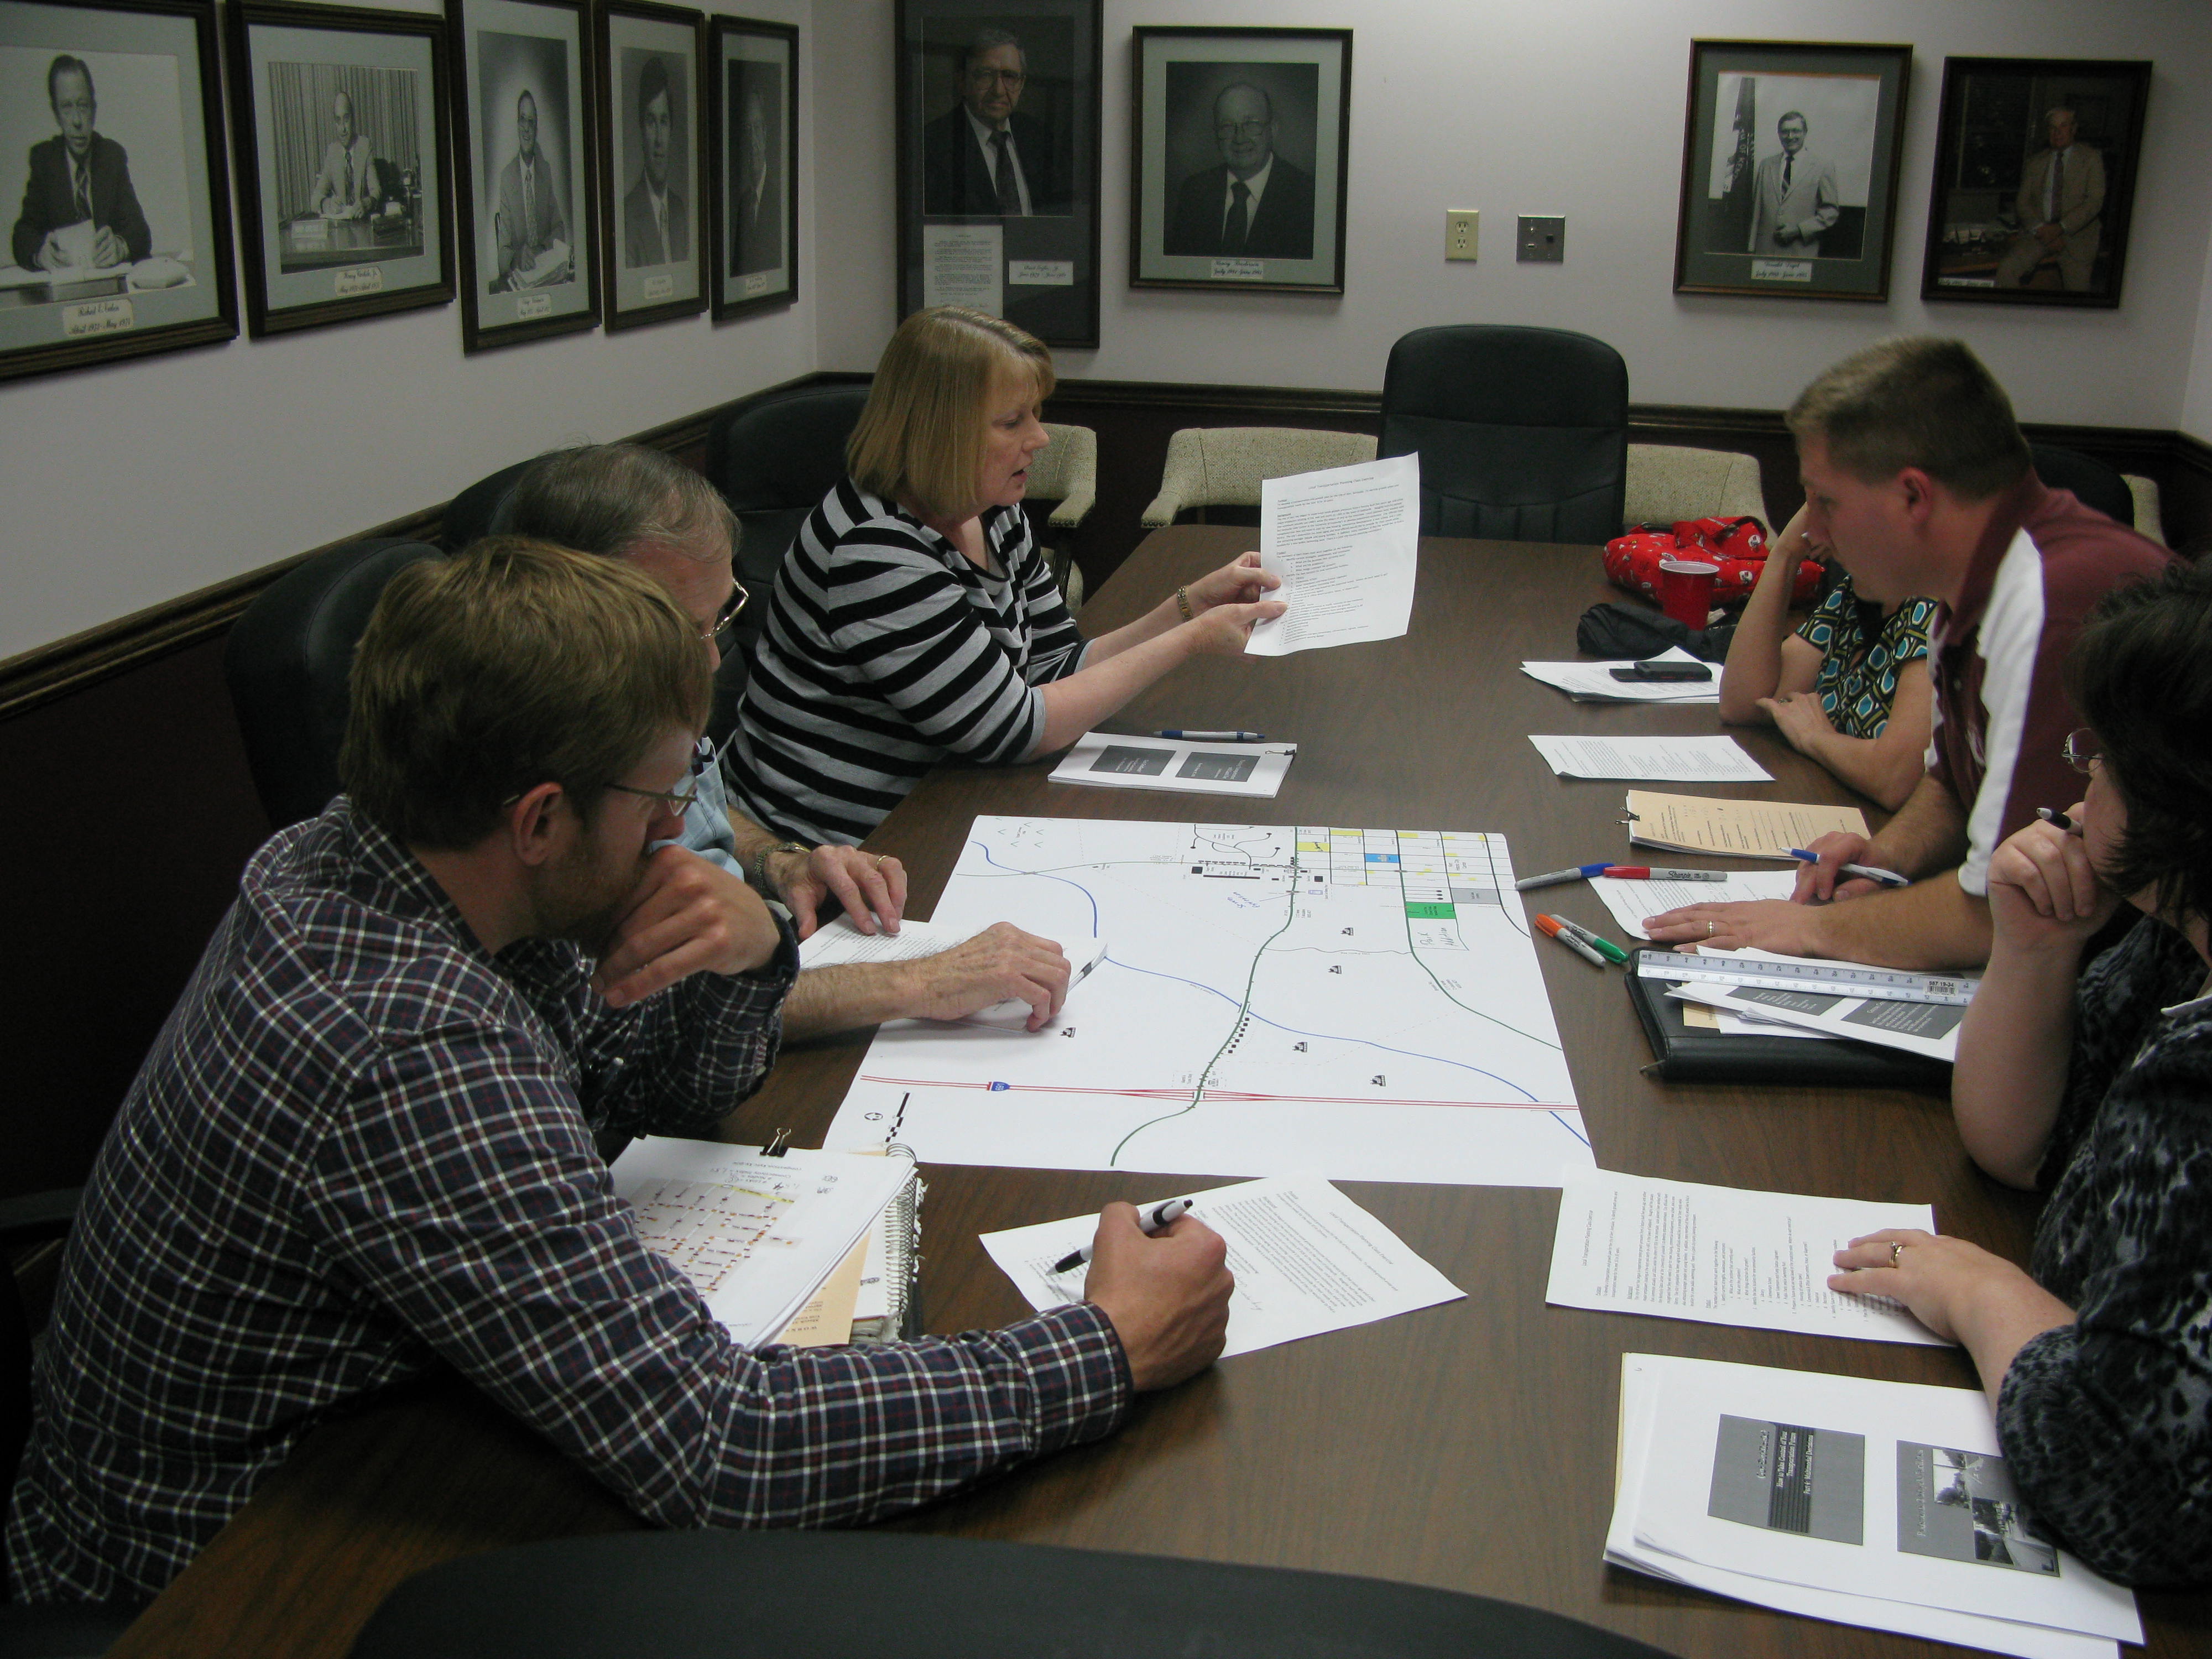 Planning and zoning officials from the ten county BRADD region received training on transportation planning issues at the BRADD offices in March. The interactive workshop was co-sponsored by the Center for Local Governments.  